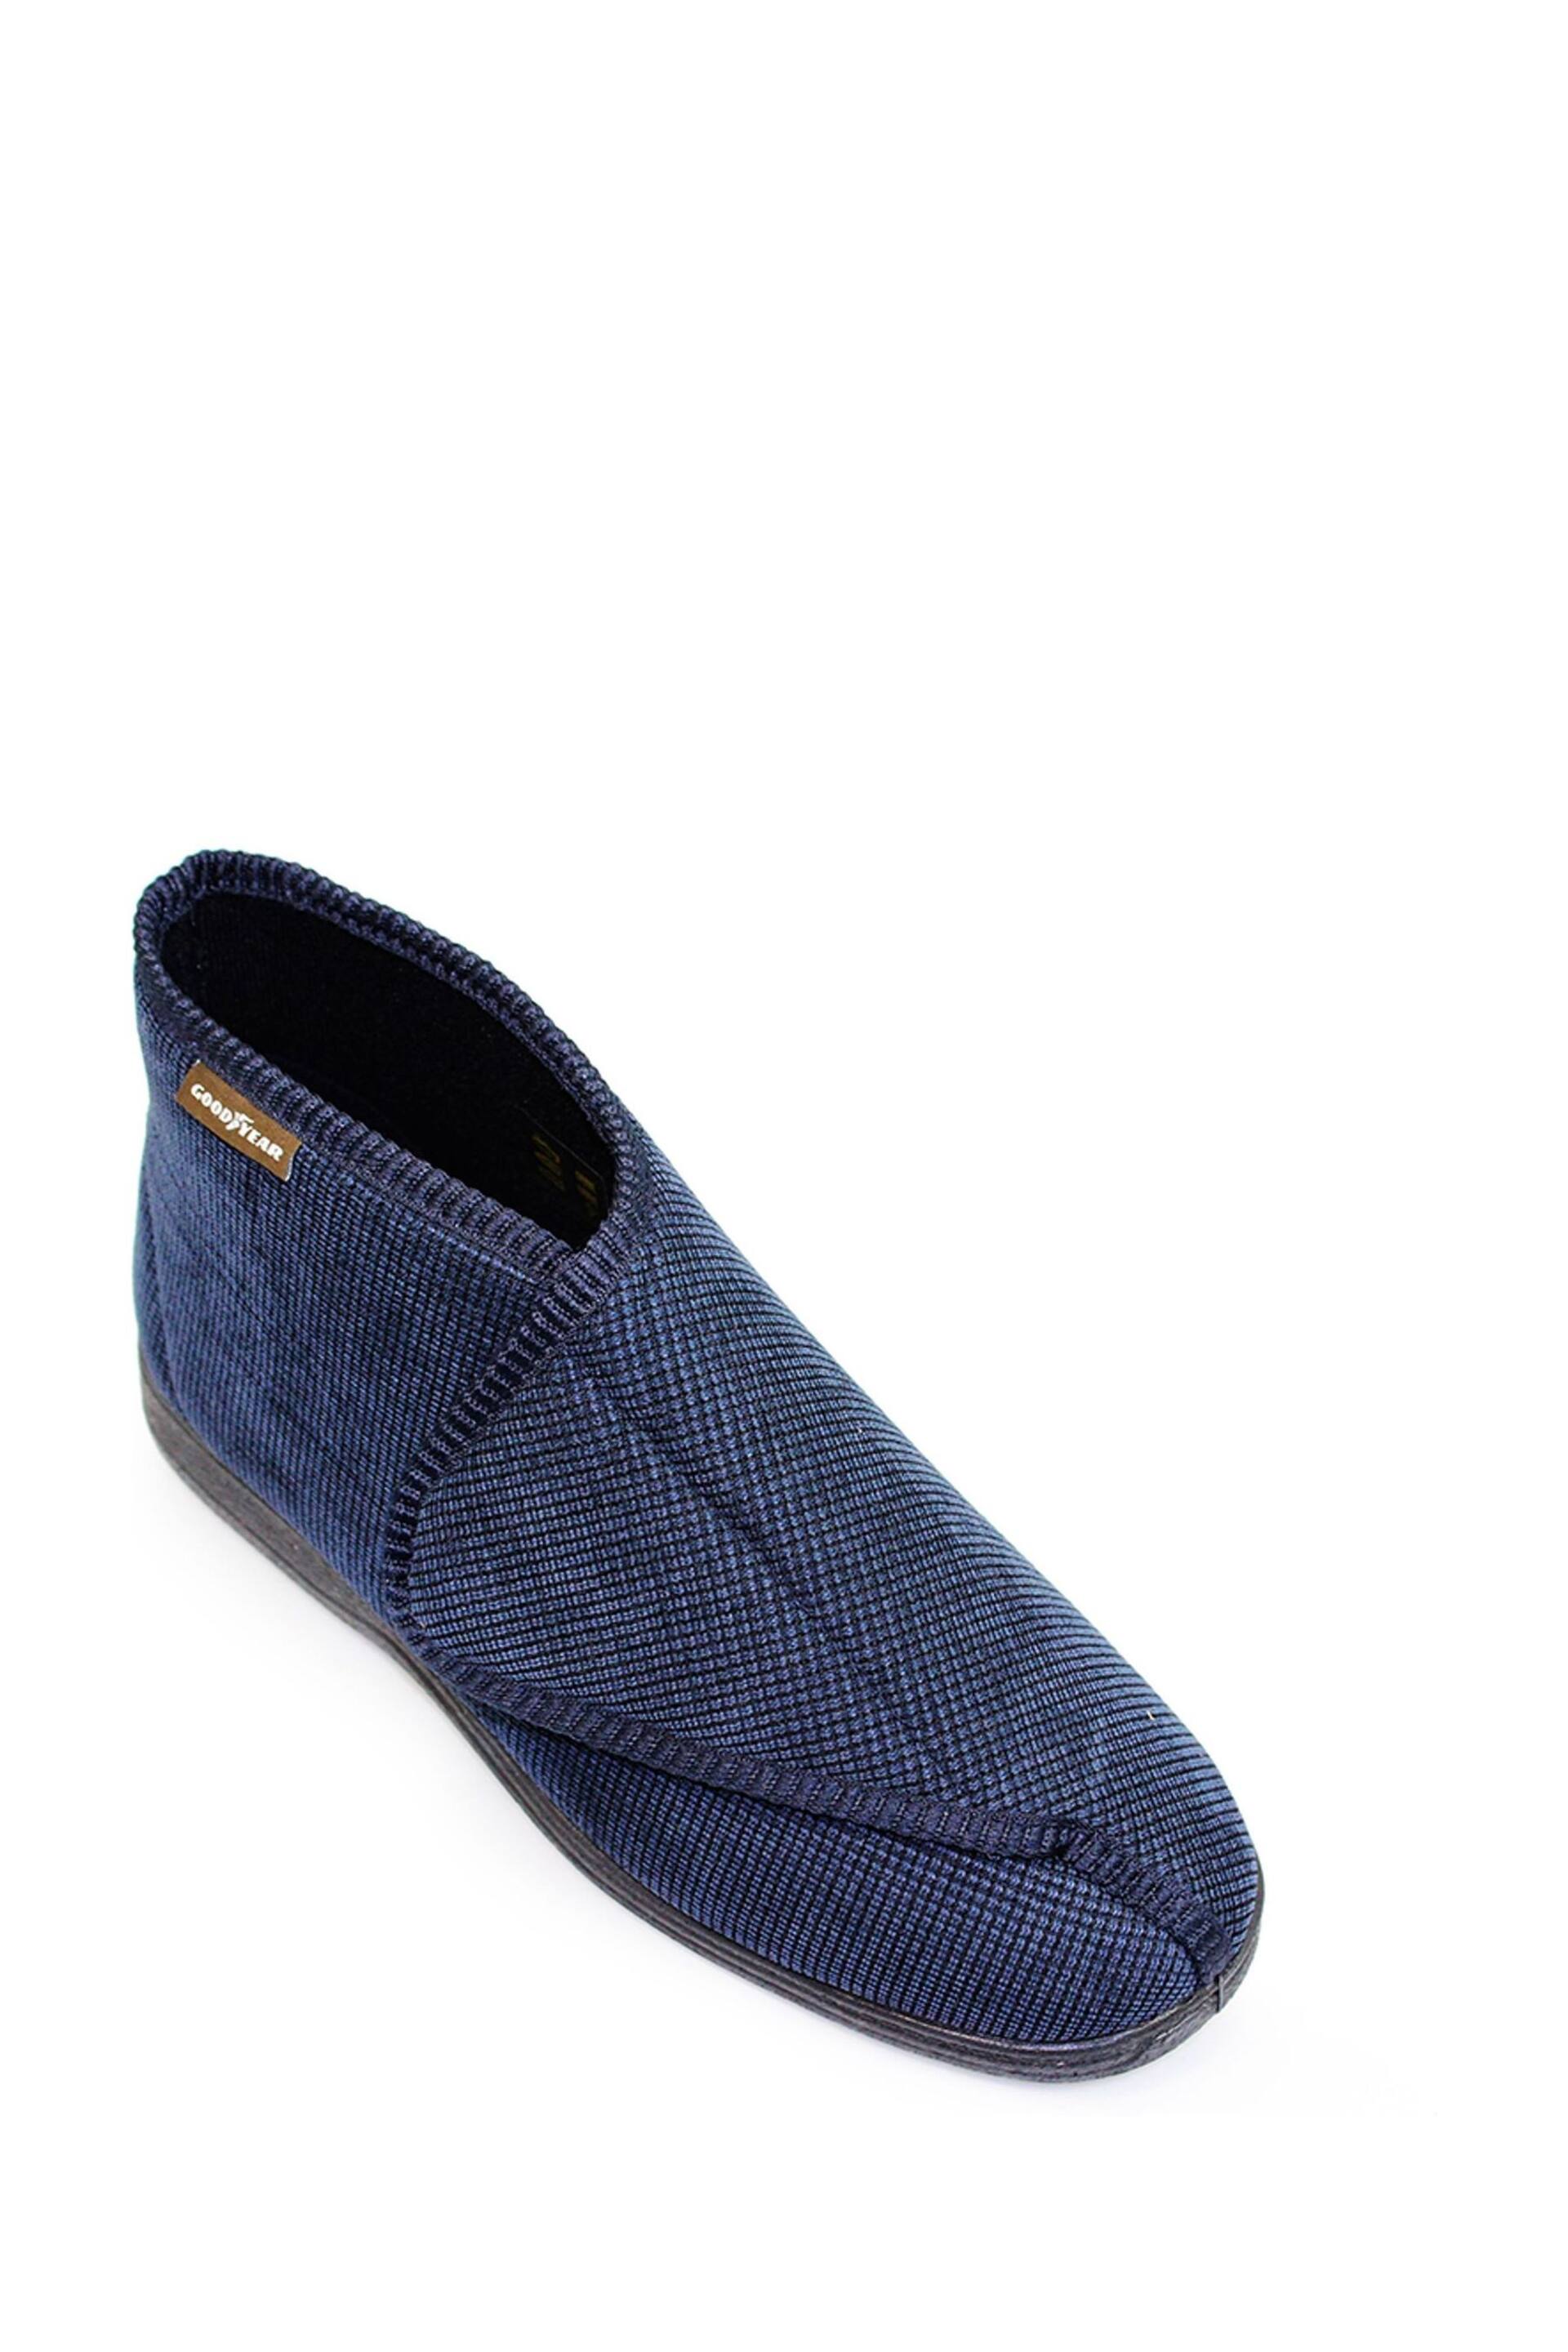 Goodyear Grey Drake Blue One Touch Bootee Slippers - Image 3 of 4